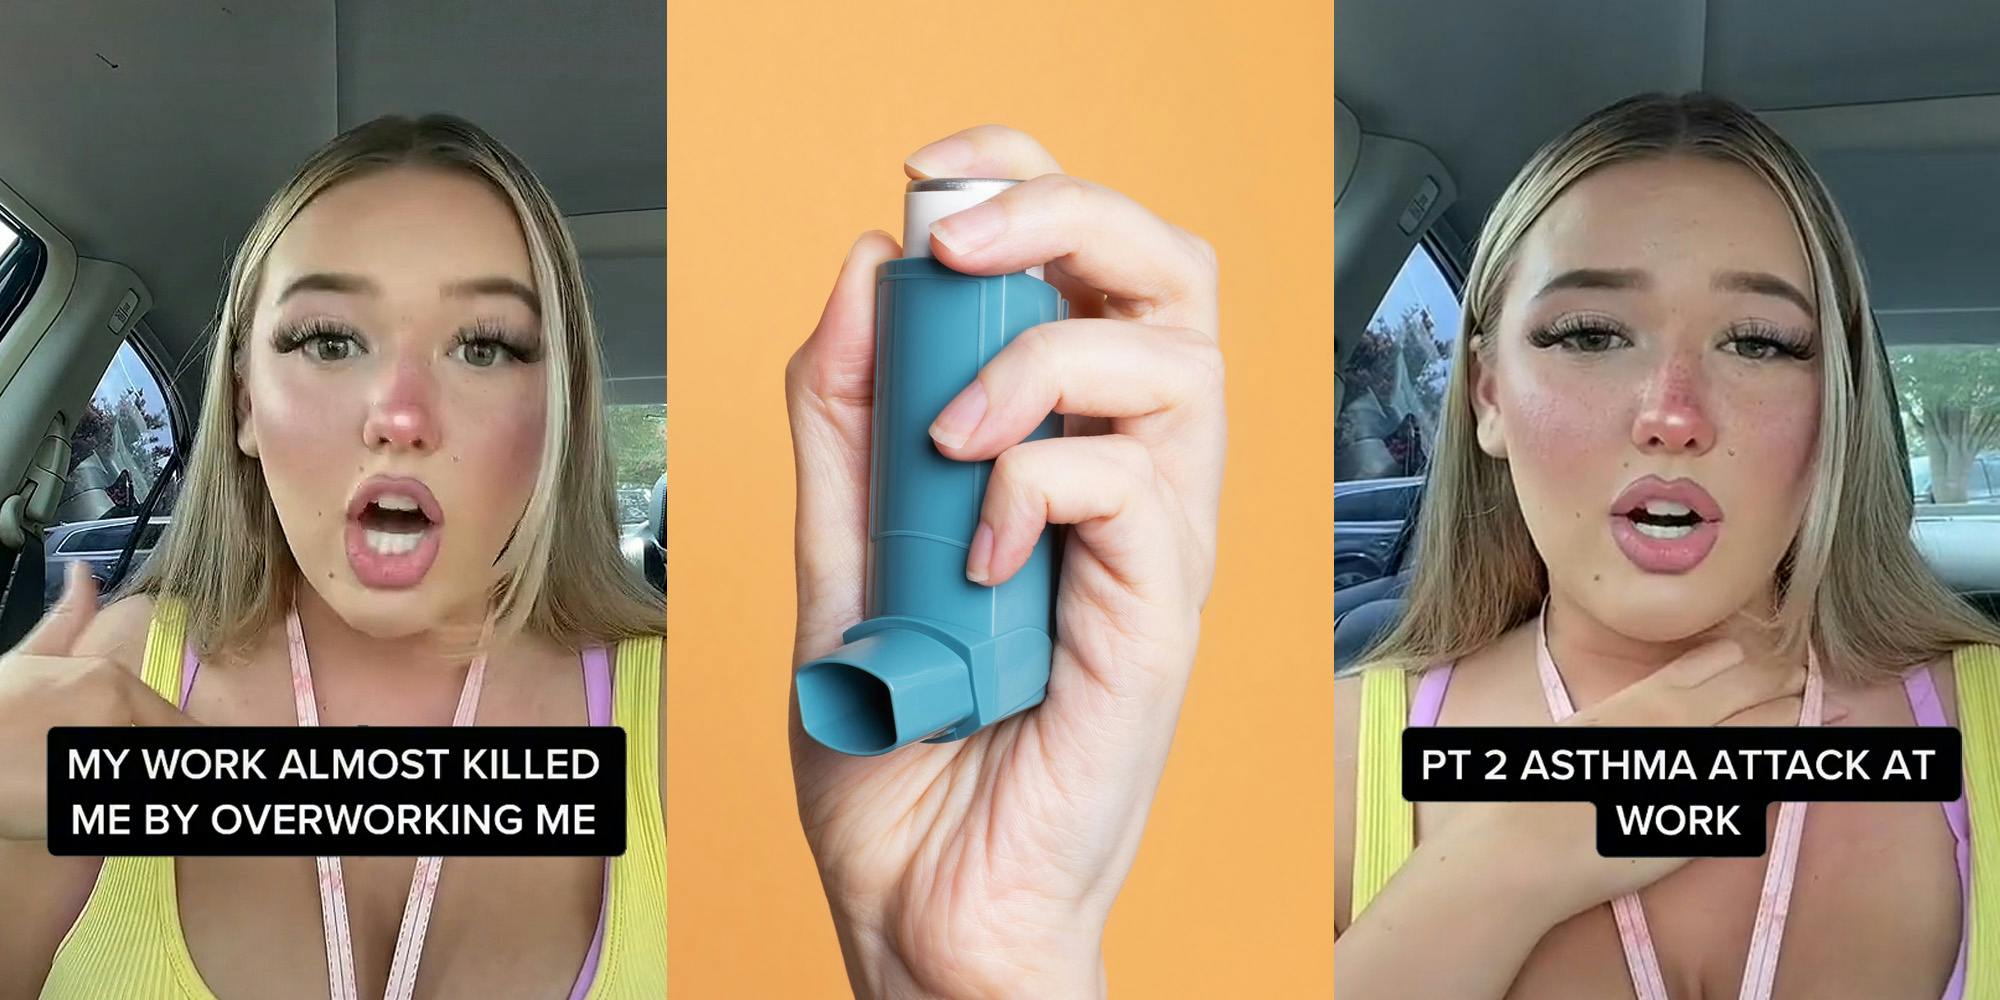 woman speakign in car hand on chest caption "MY WORK ALMOST KILLED ME BY OVERWORKING ME" (l) hand holding asthma inhaler on orange background (c) woman speaking in car hand on neck caption "PT 2 ASTHMA ATTACK AT WORK" (r)